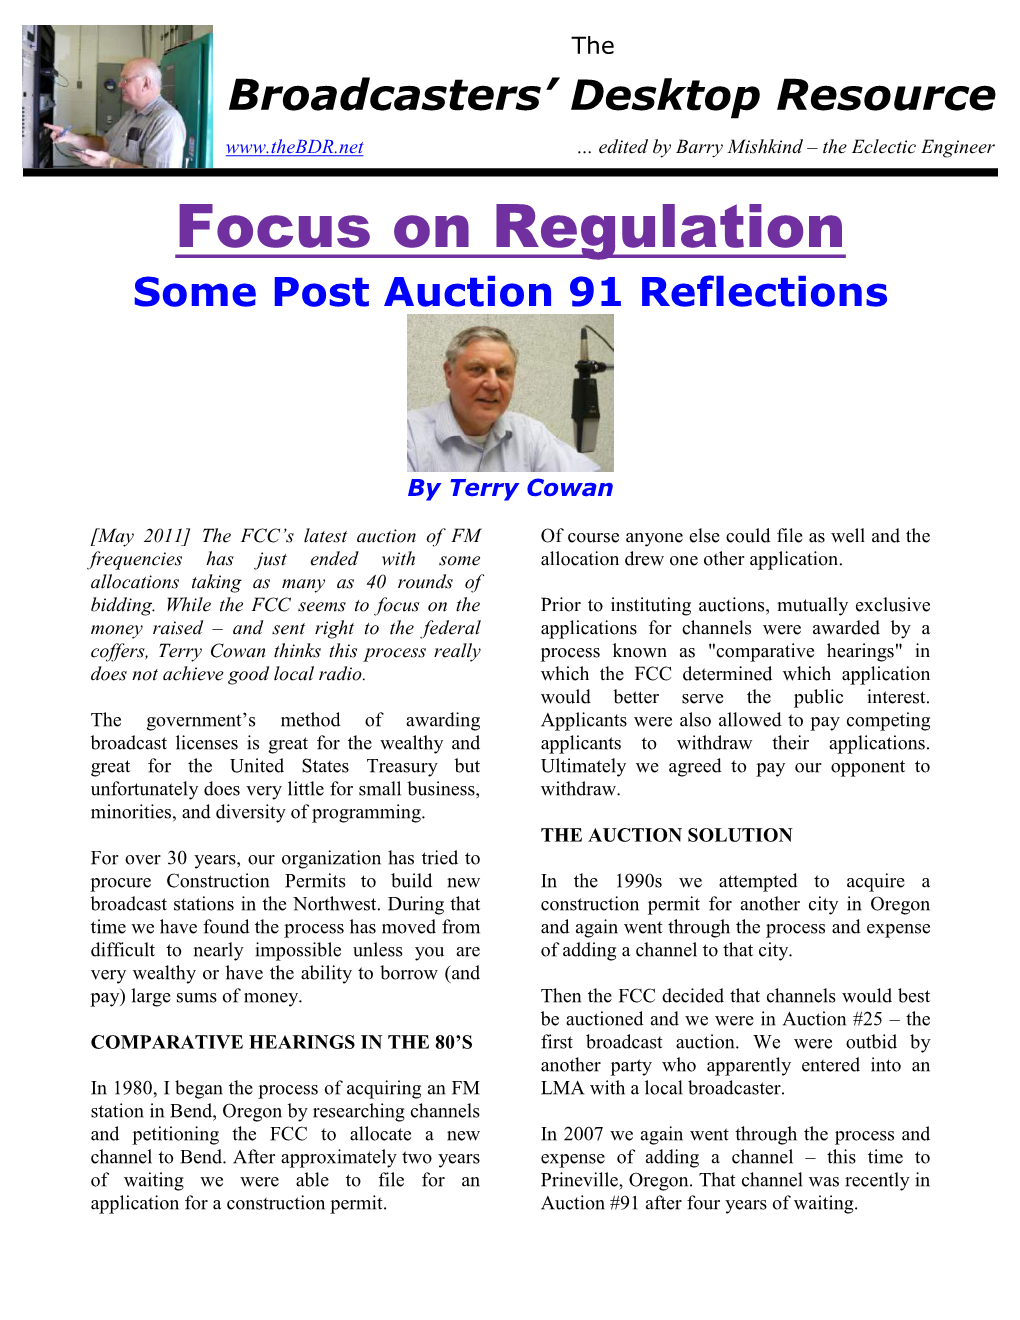 Focus on Regulation Some Post Auction 91 Reflections